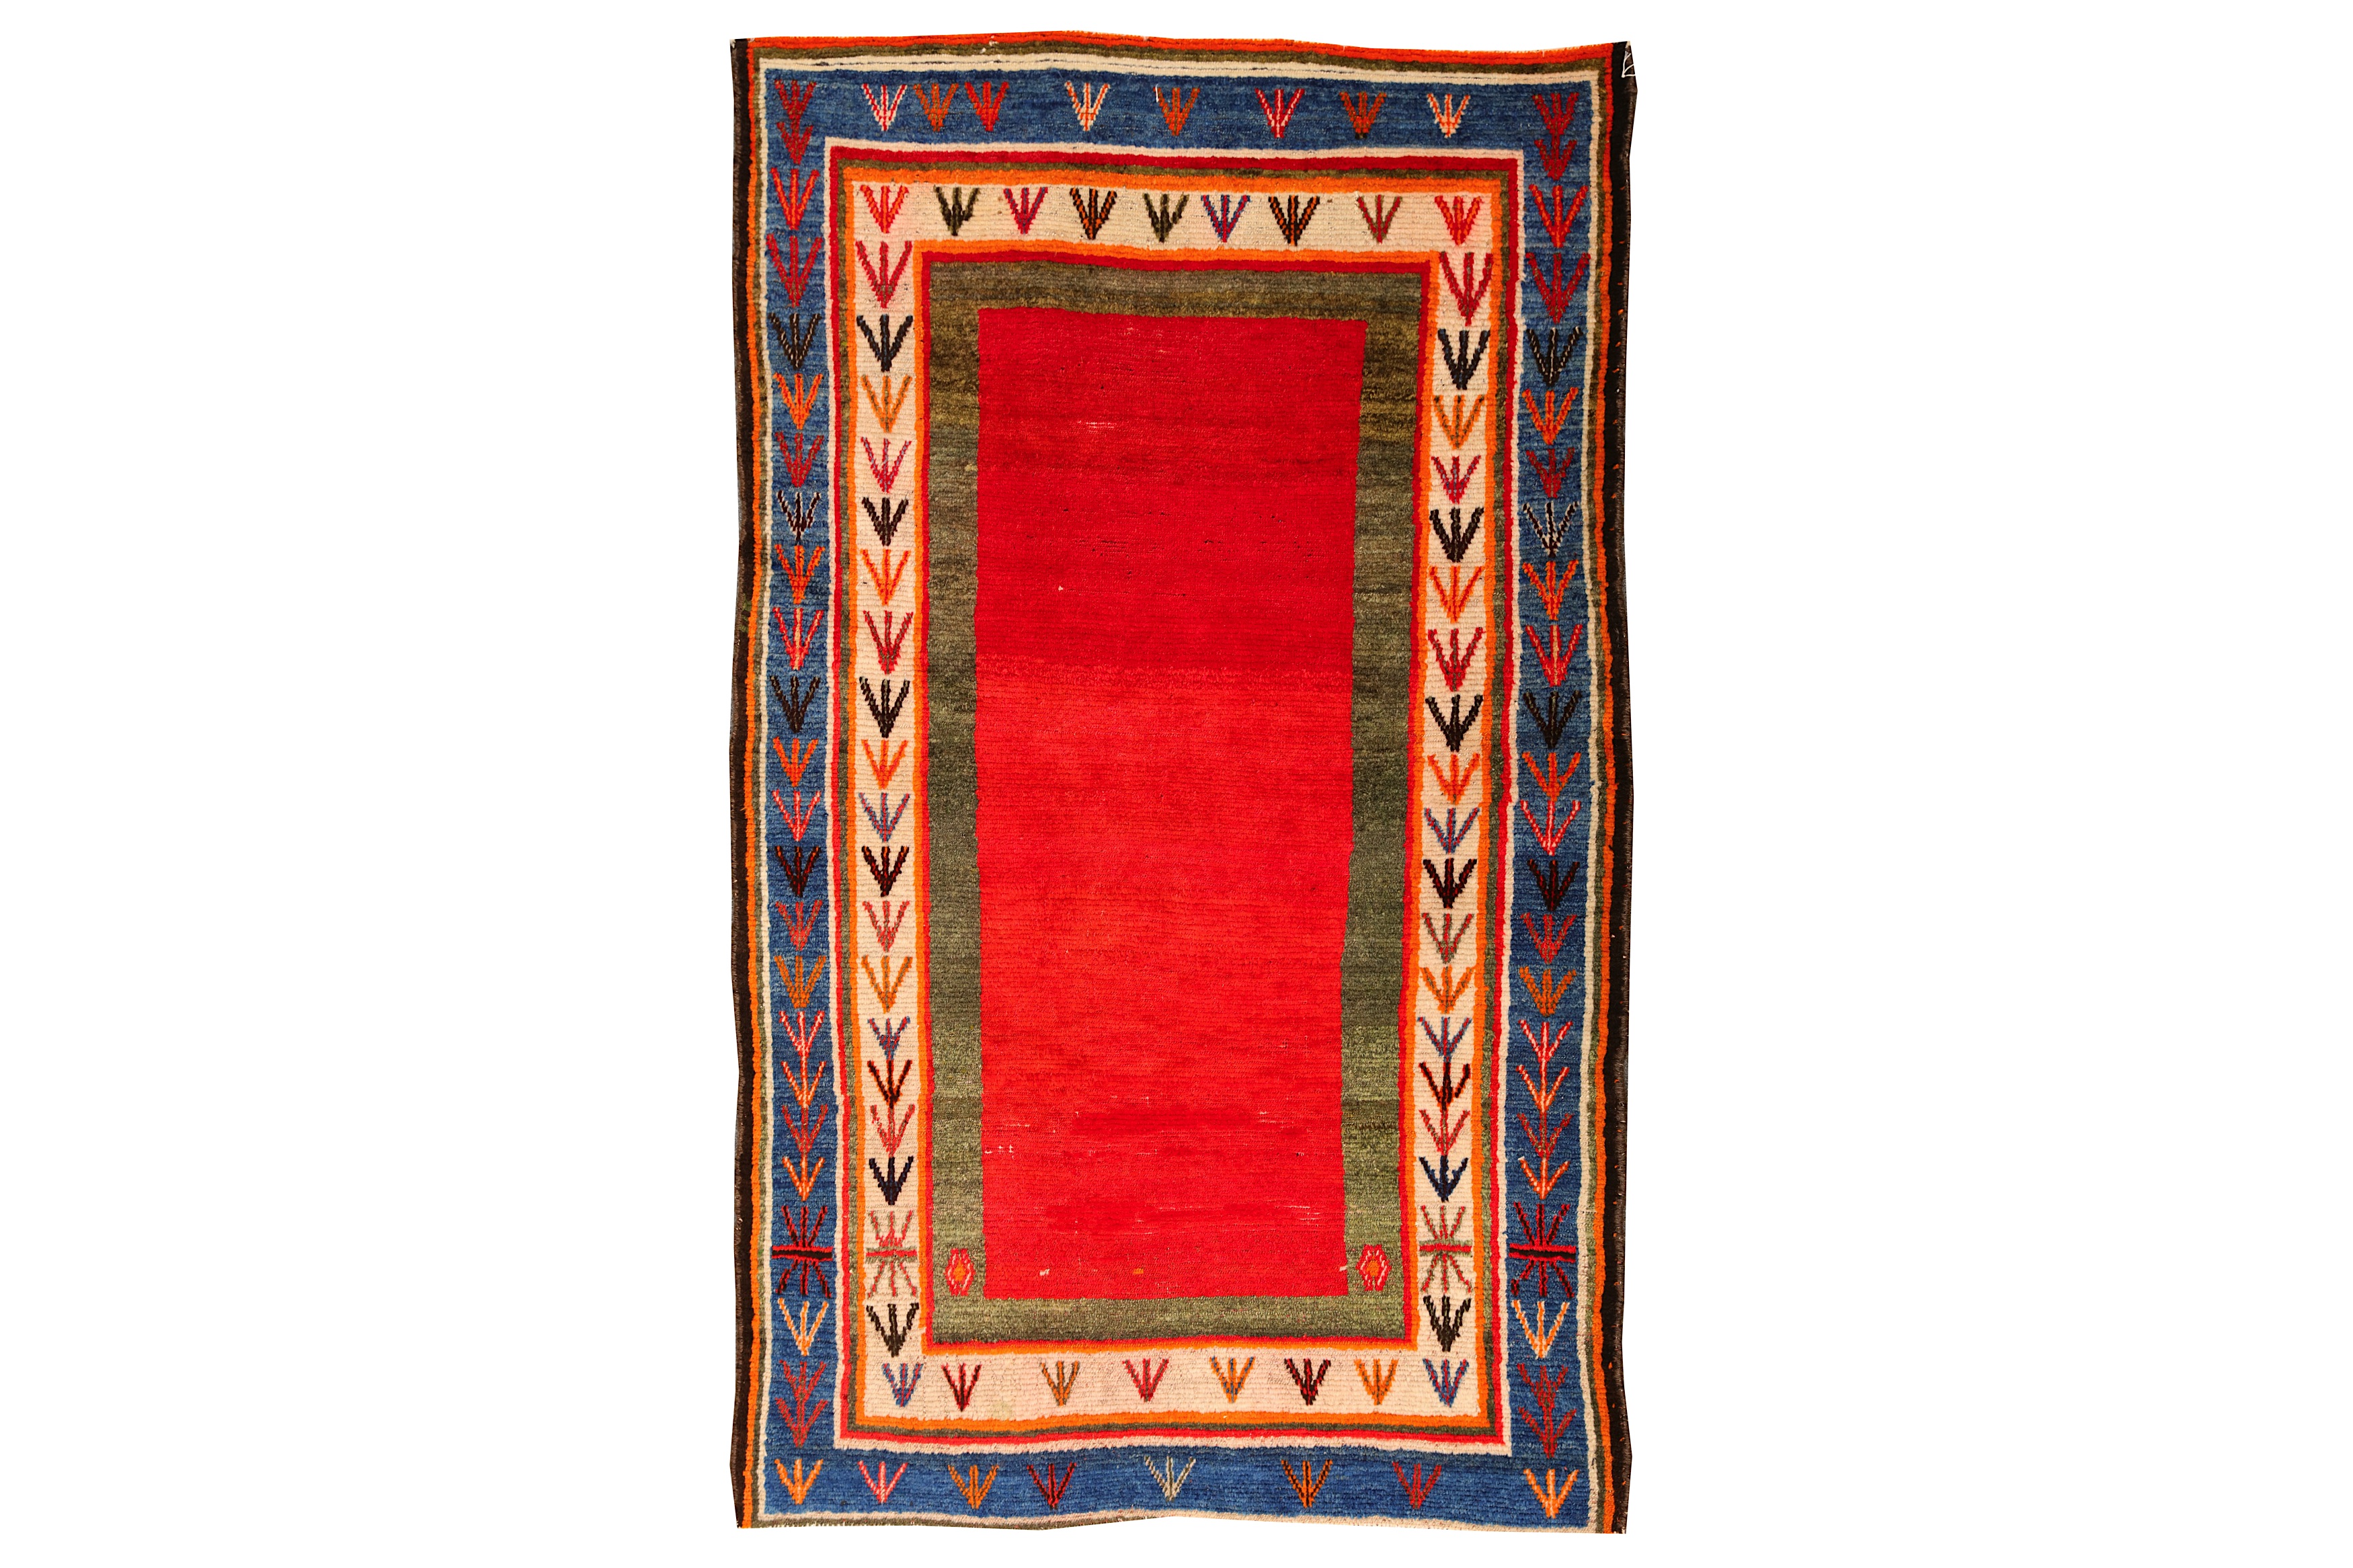 AN UNUSUAL GABBEH RUG, SOUTH-WEST PERSIA